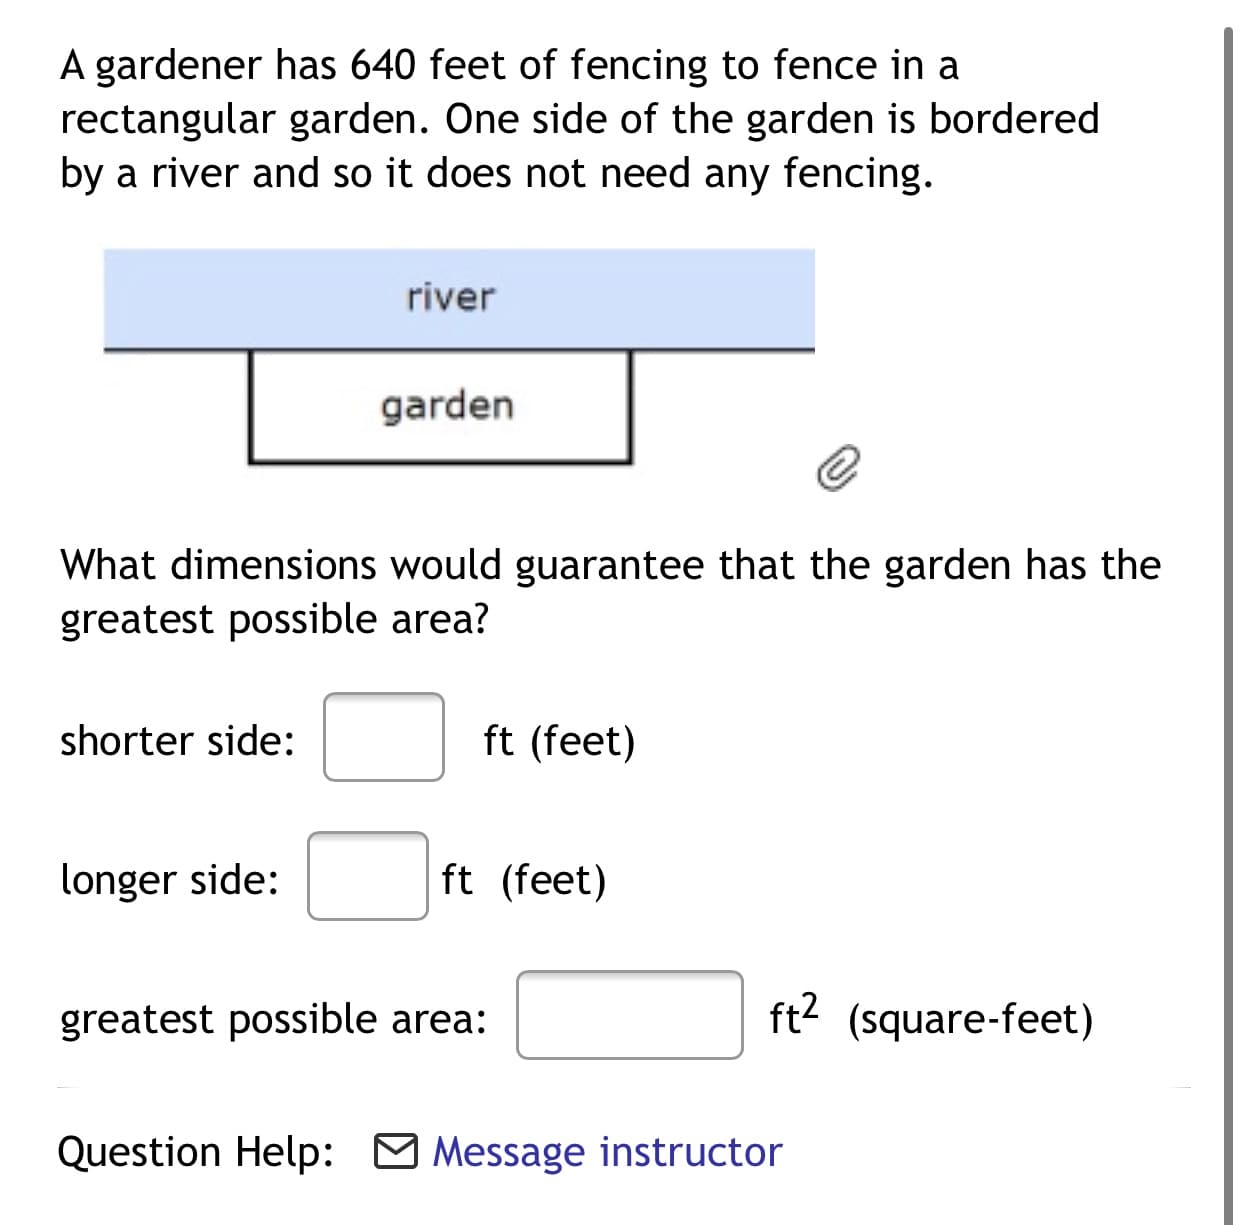 A gardener has 640 feet of fencing to fence in a
rectangular garden. One side of the garden is bordered
by a river and so it does not need any fencing.
river
garden
What dimensions would guarantee that the garden has the
greatest possible area?
shorter side:
ft (feet)
longer side:
ft (feet)
greatest possible area:
ft2 (square-feet)
